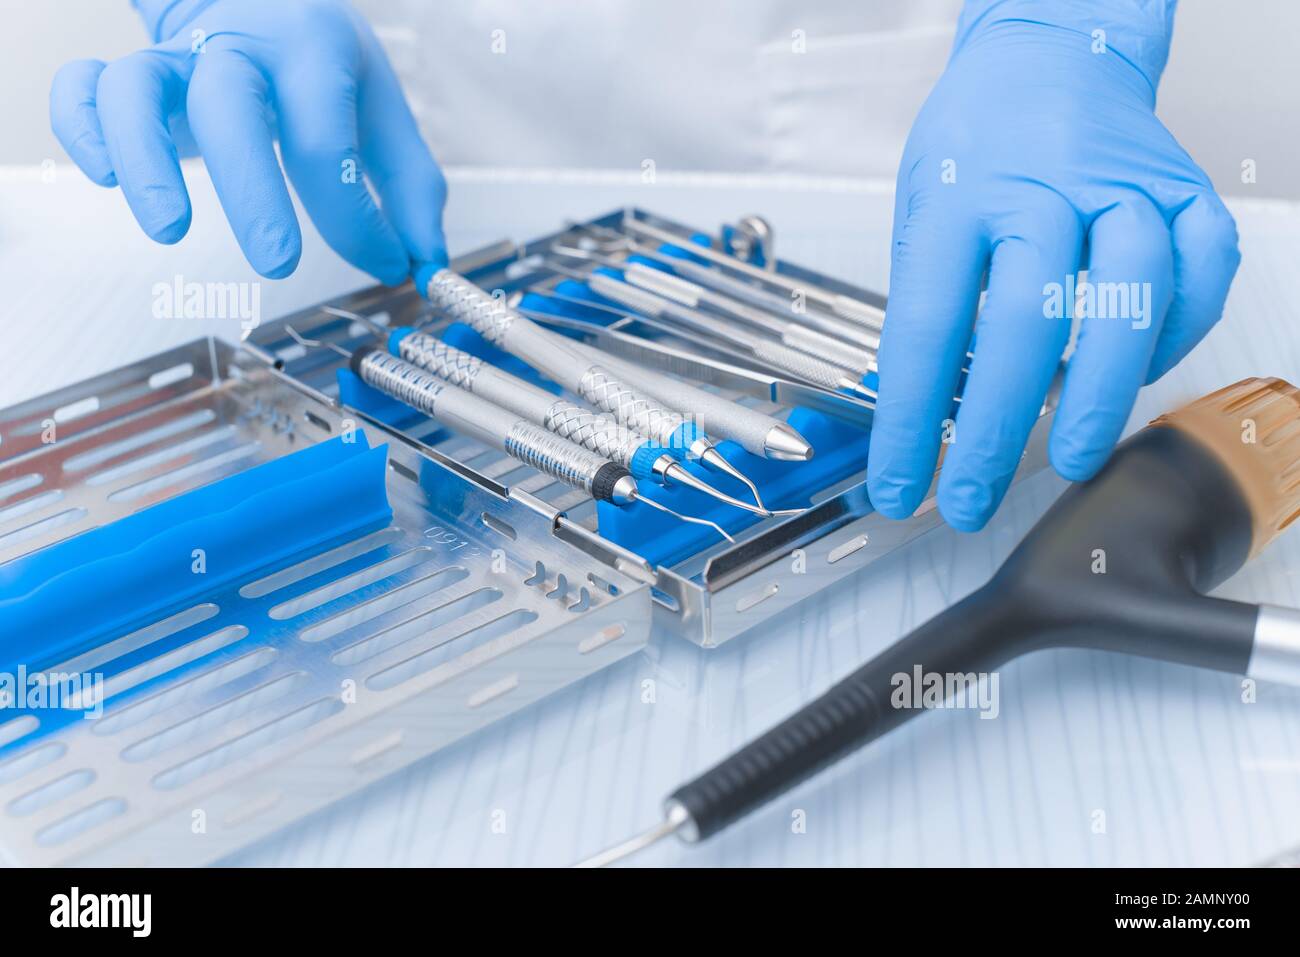 Dental tools in the hands of a doctor close-up. Dentistry Concept. Stock Photo